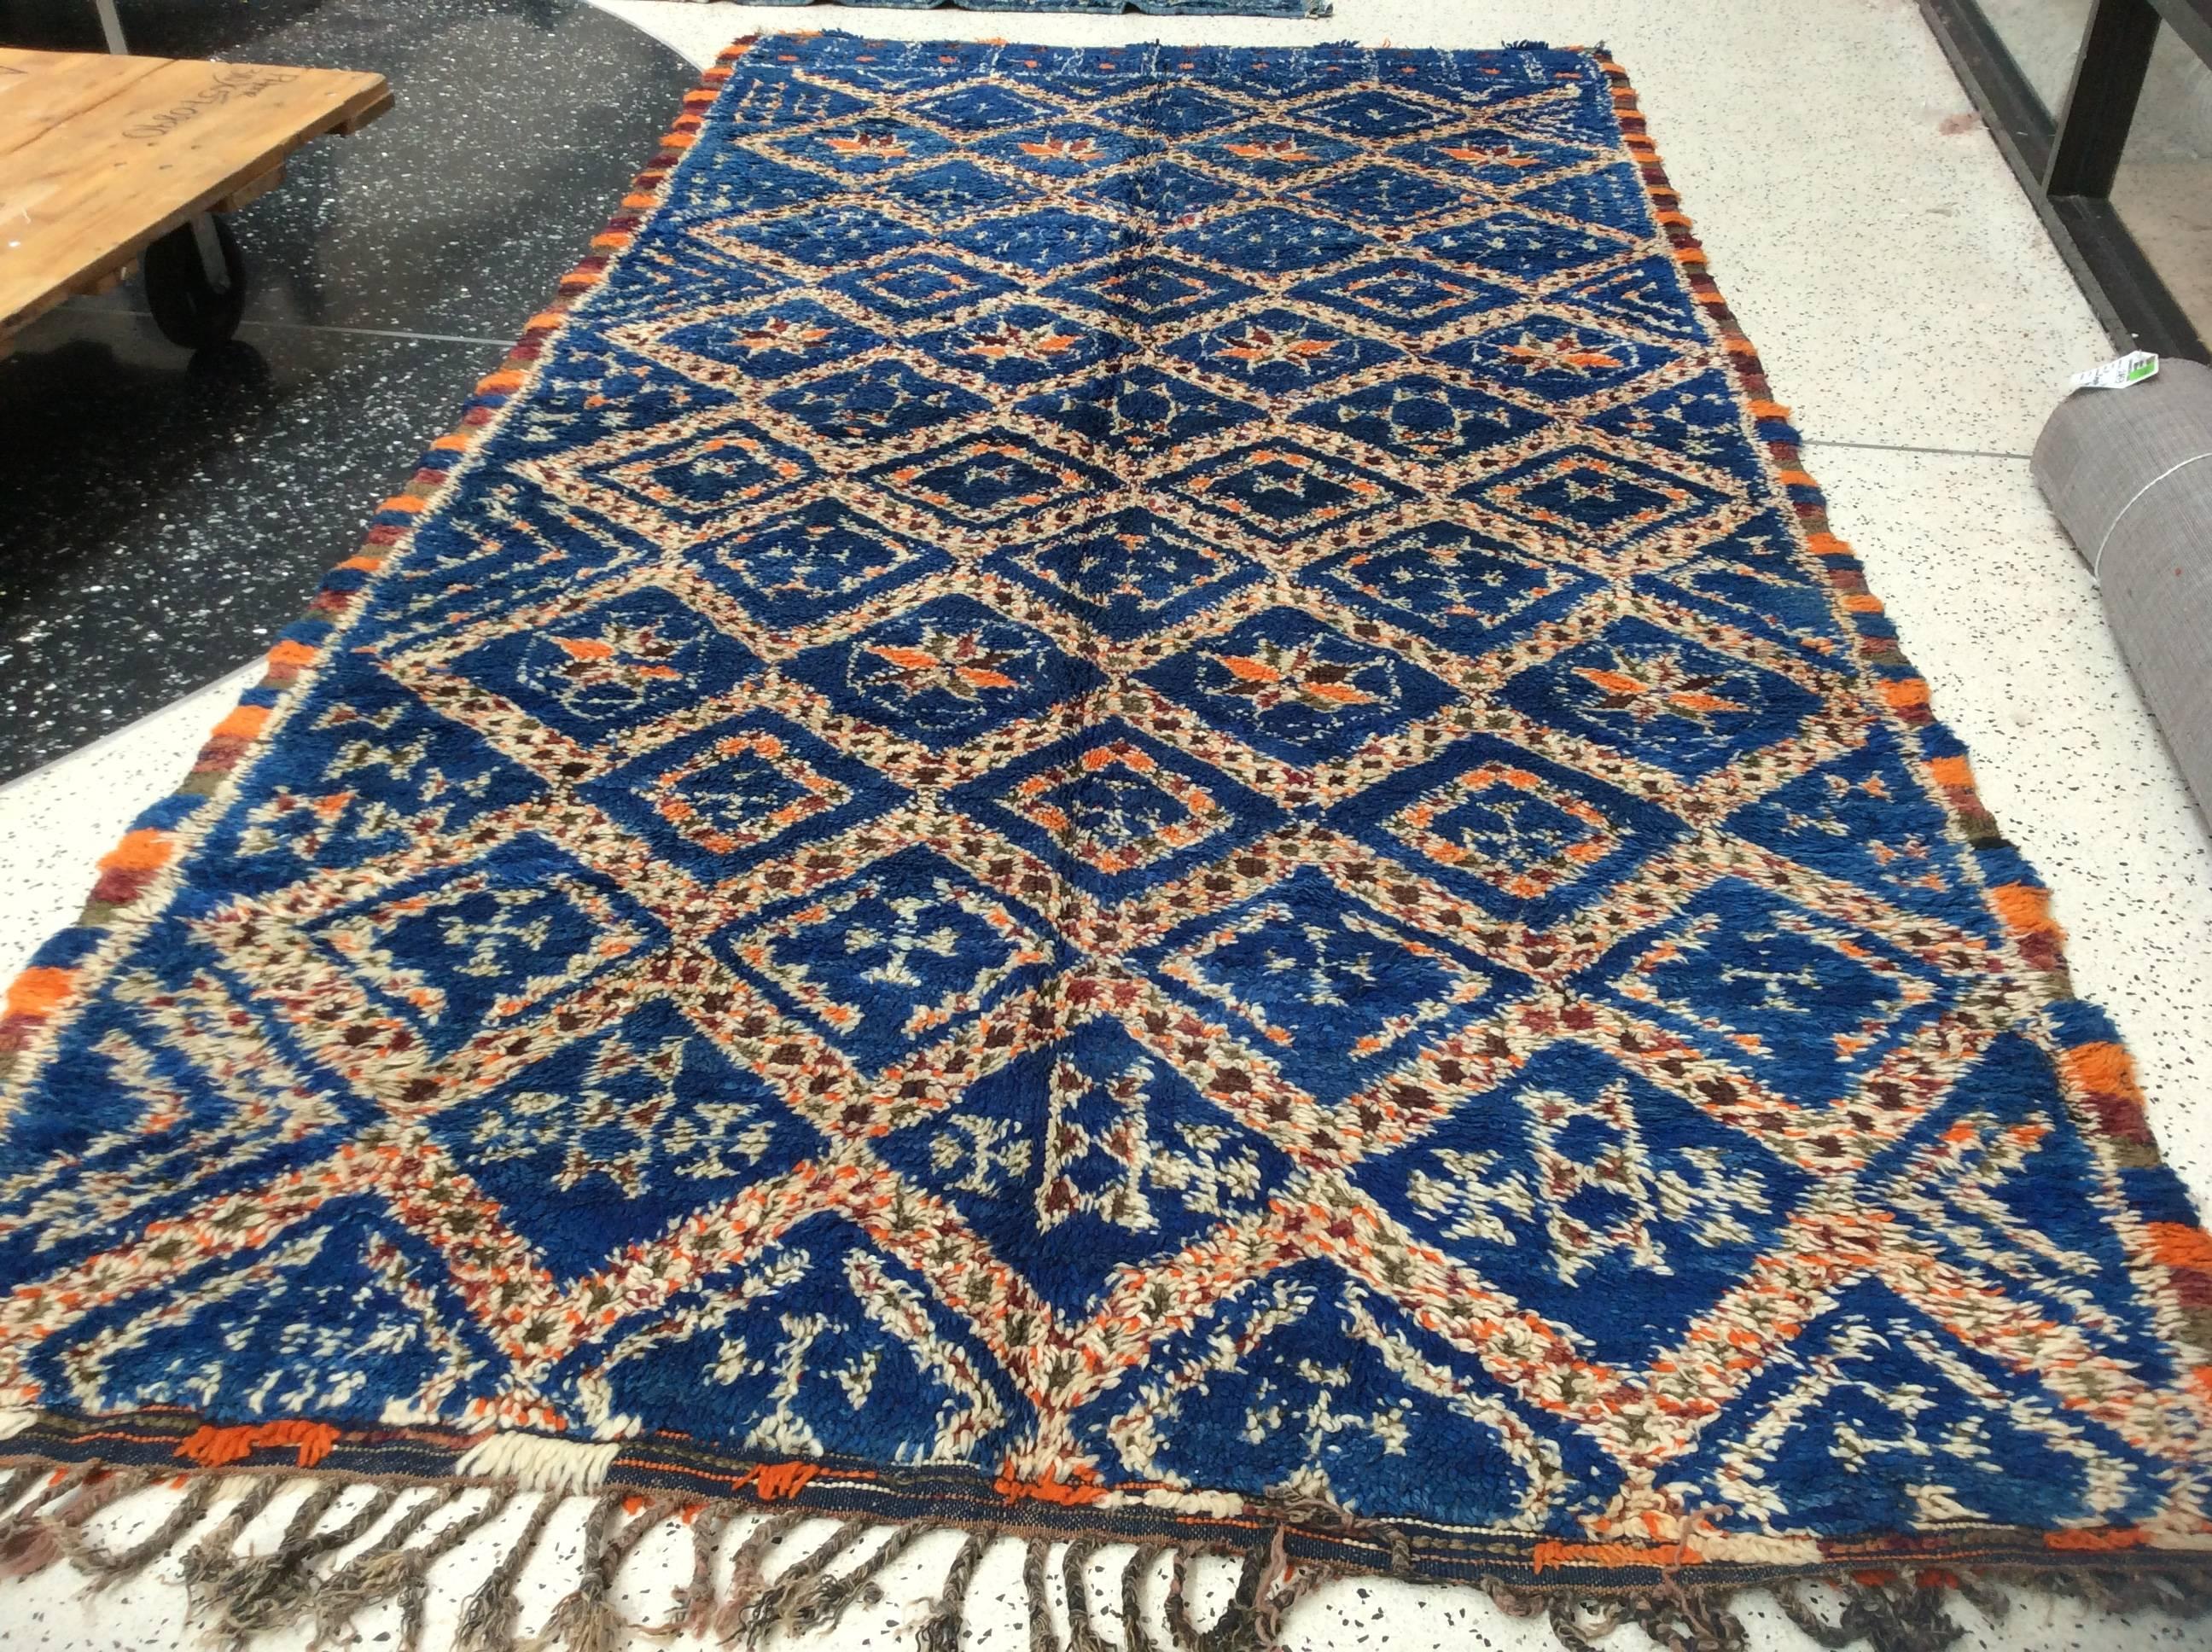 Tribal Blue Moroccan Berber rug

A weaving technique that has been passed down from generations to generations makes Moroccan Berber rug such a fine addition to your collection. It is made of luxurious hand-spun wool by the high atlas tribe, no